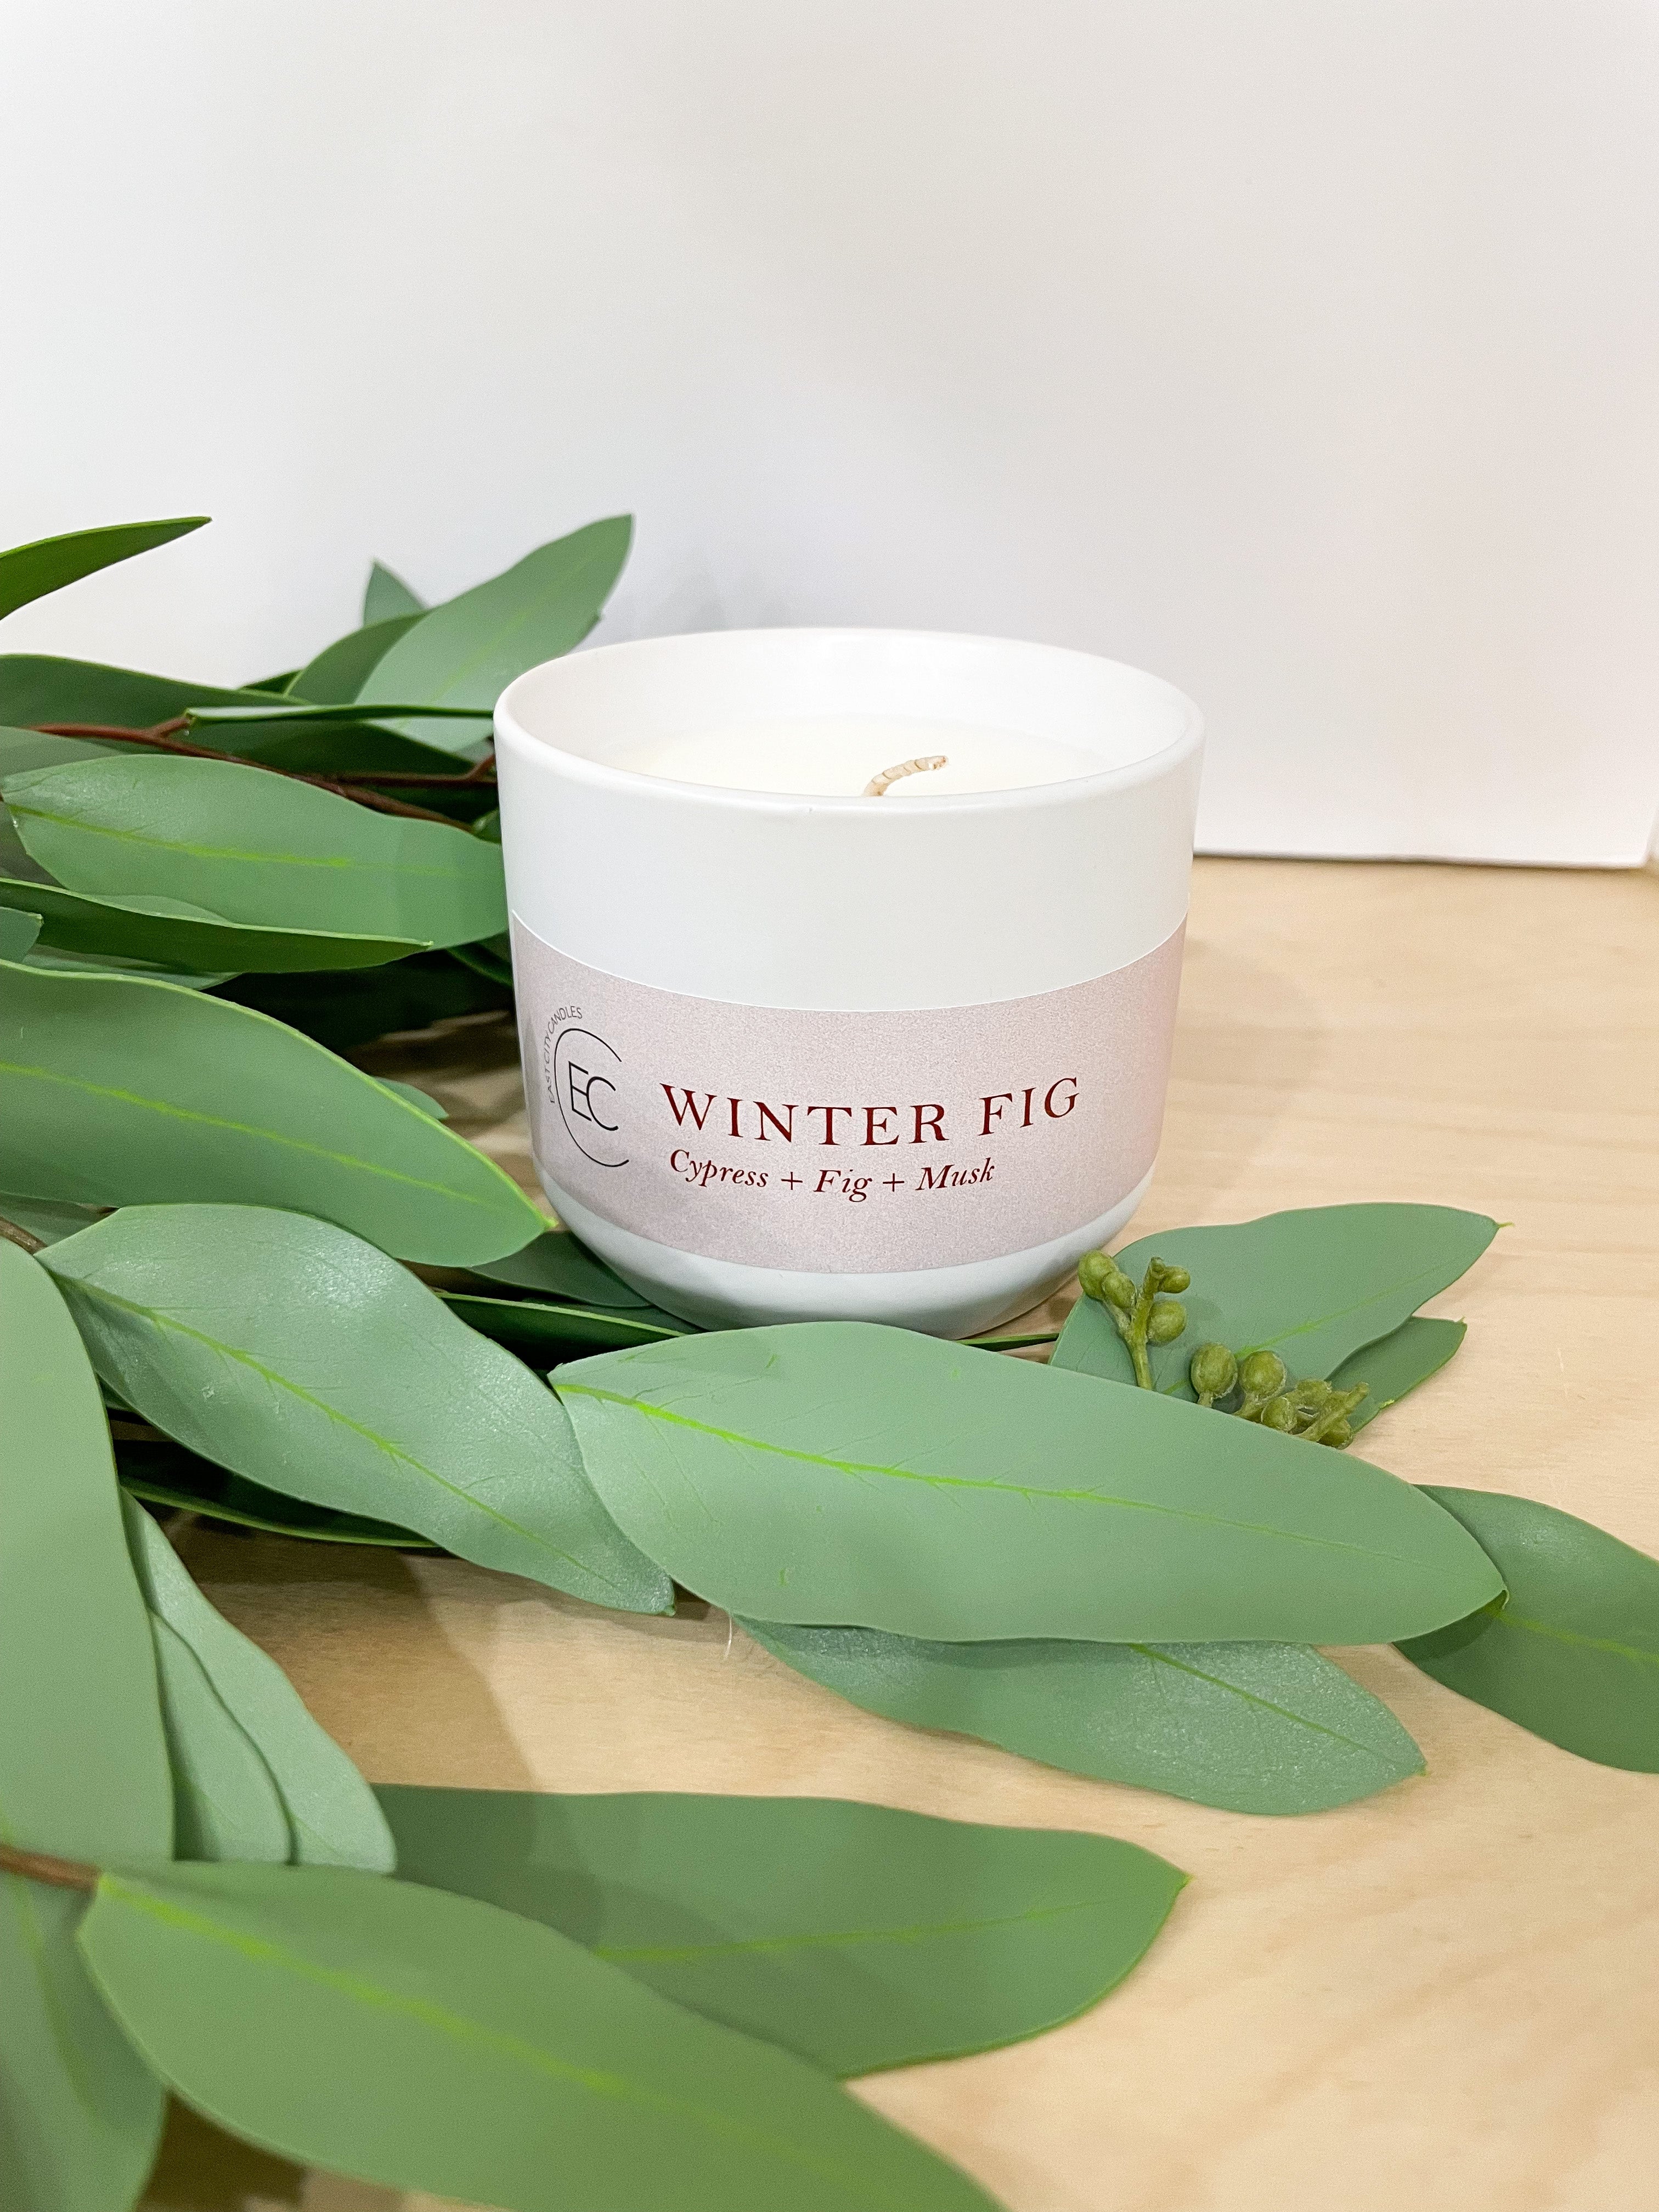 Winter Fig Candle